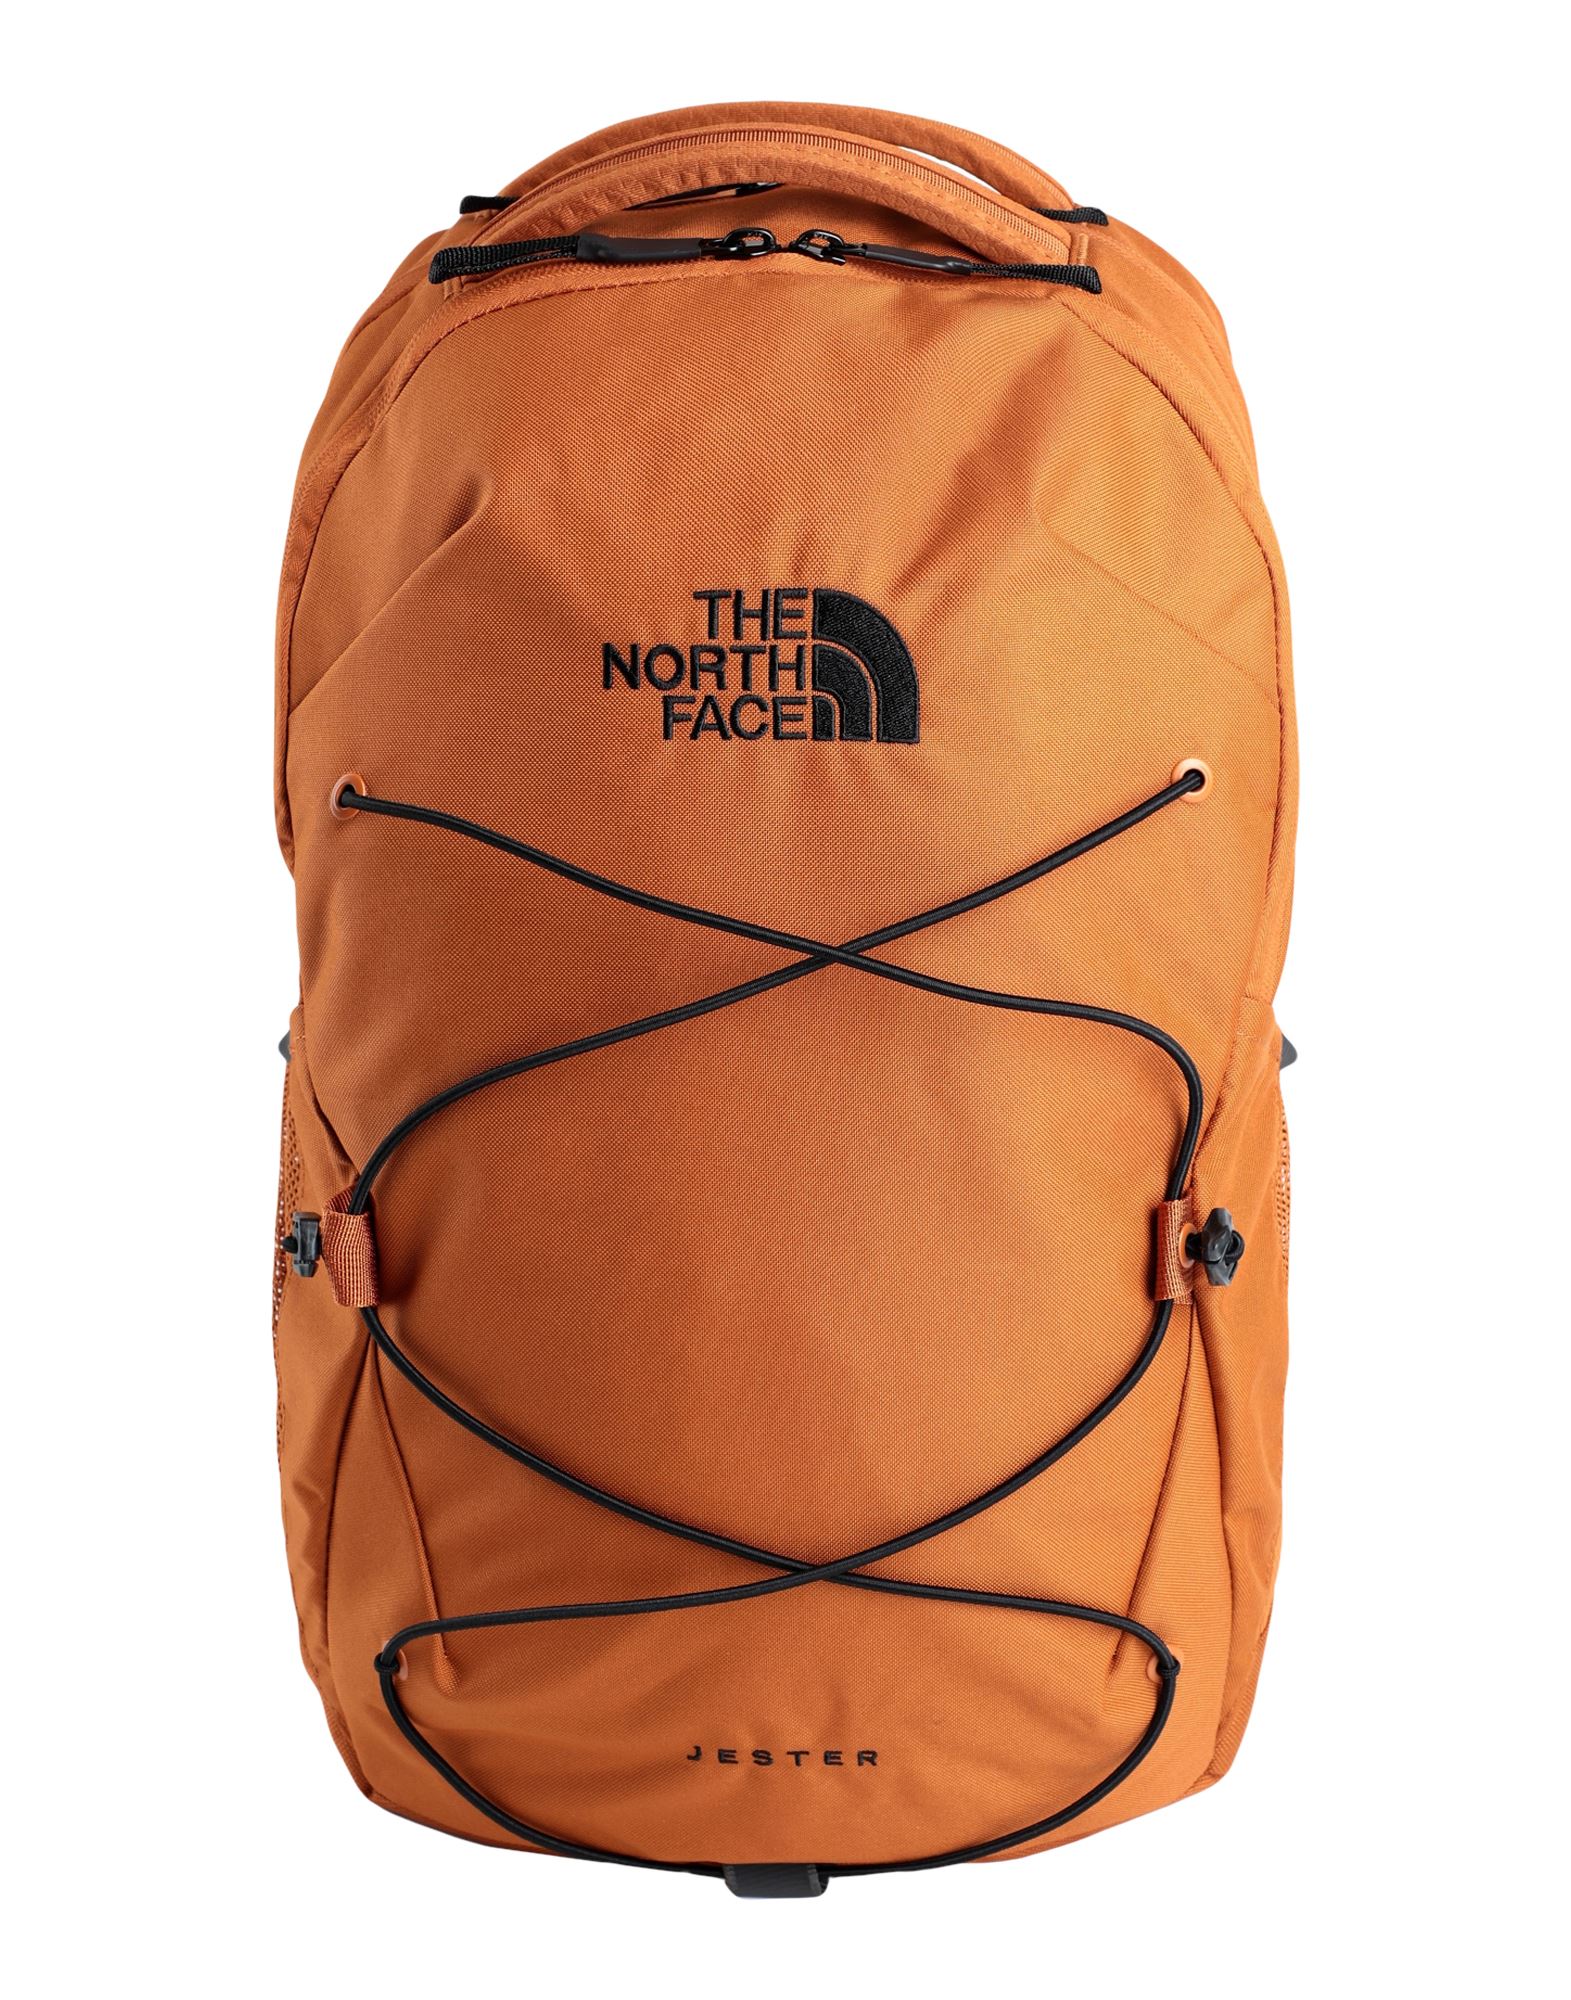 The North Face Backpacks In Rust